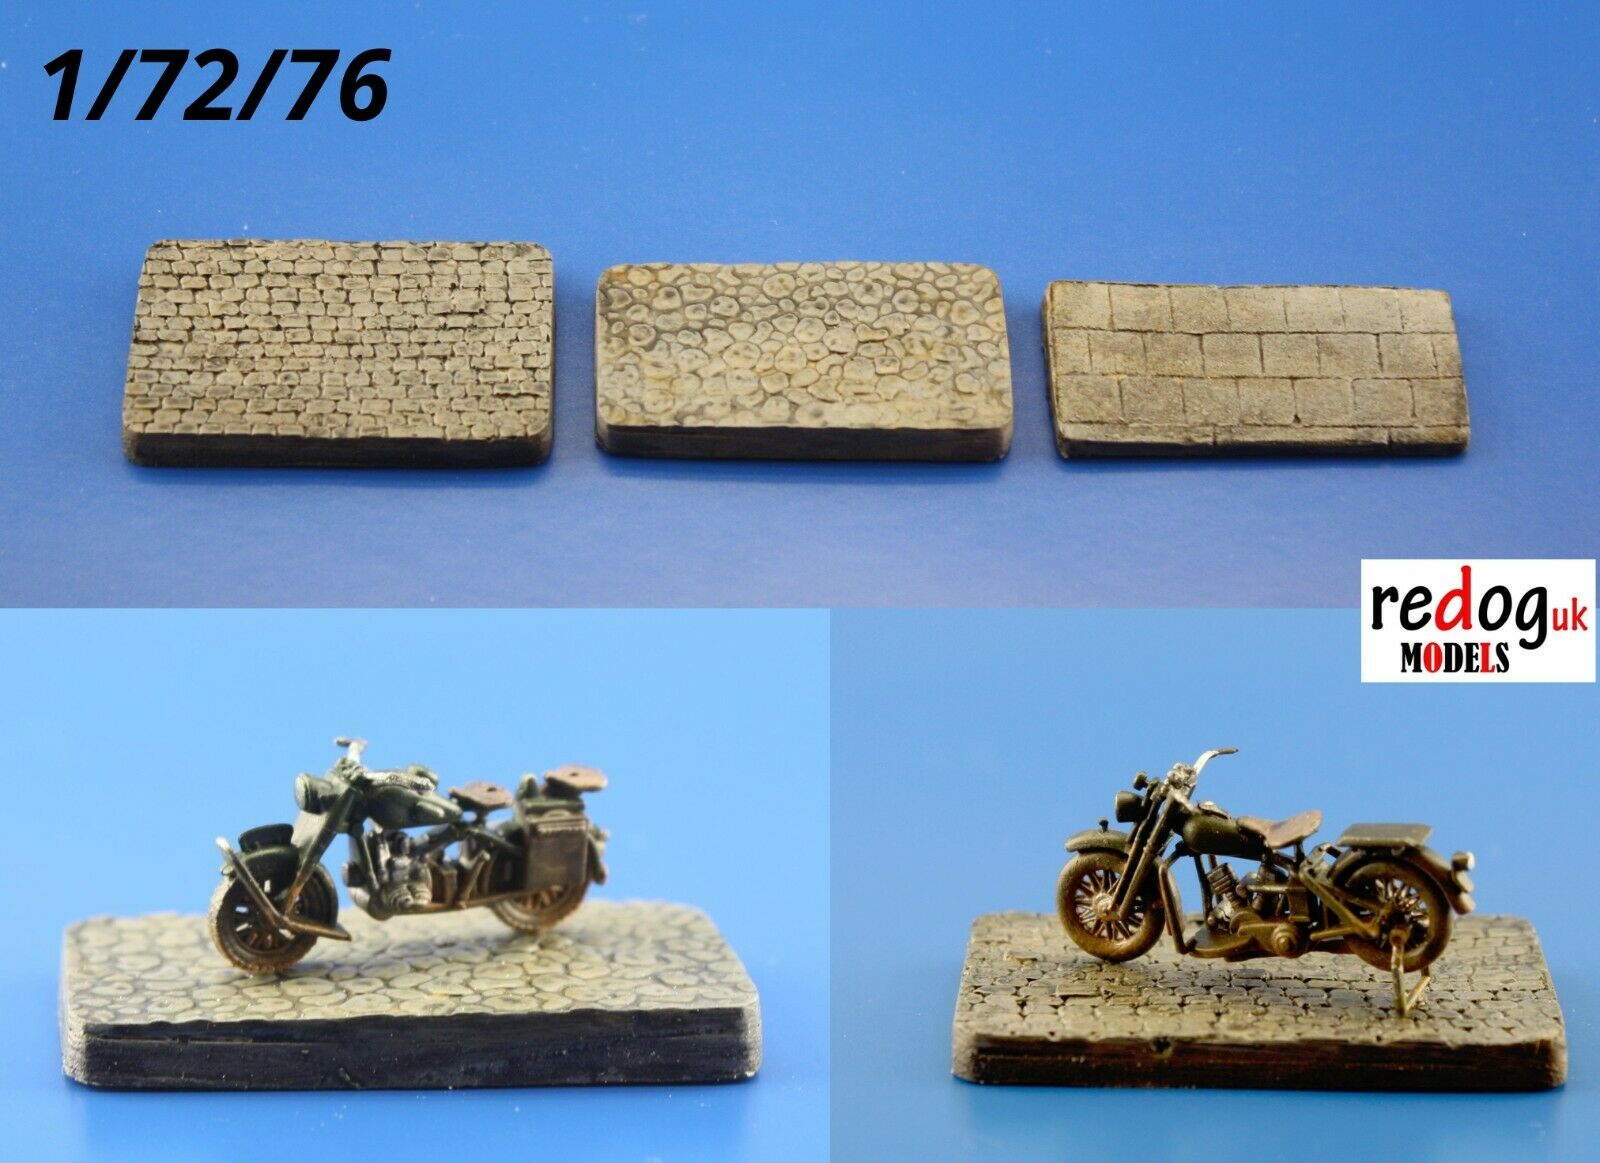 1/72  3x Small Display Bases for Military Scale Model Motorbikes - redoguk